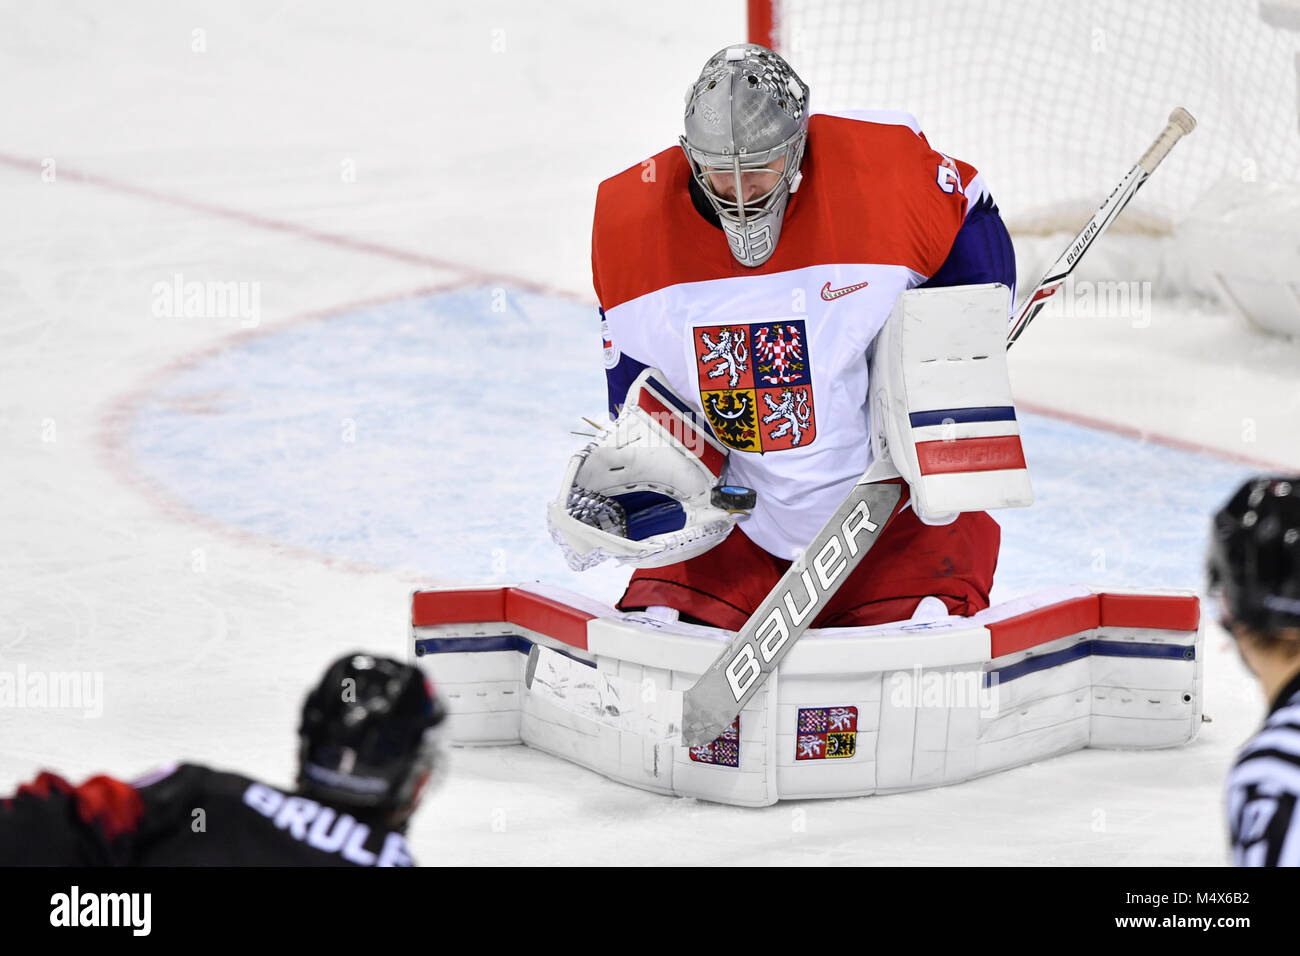 Kangnung, Korea. 17th Feb, 2018. Goalkeeper Pavel Francouz (CZE) in action during the Canada vs Czech Republic ice hockey match within the 2018 Winter Olympics in Gangneung, South Korea, February 17, 2018. Credit: Michal Kamaryt/CTK Photo/Alamy Live News Stock Photo